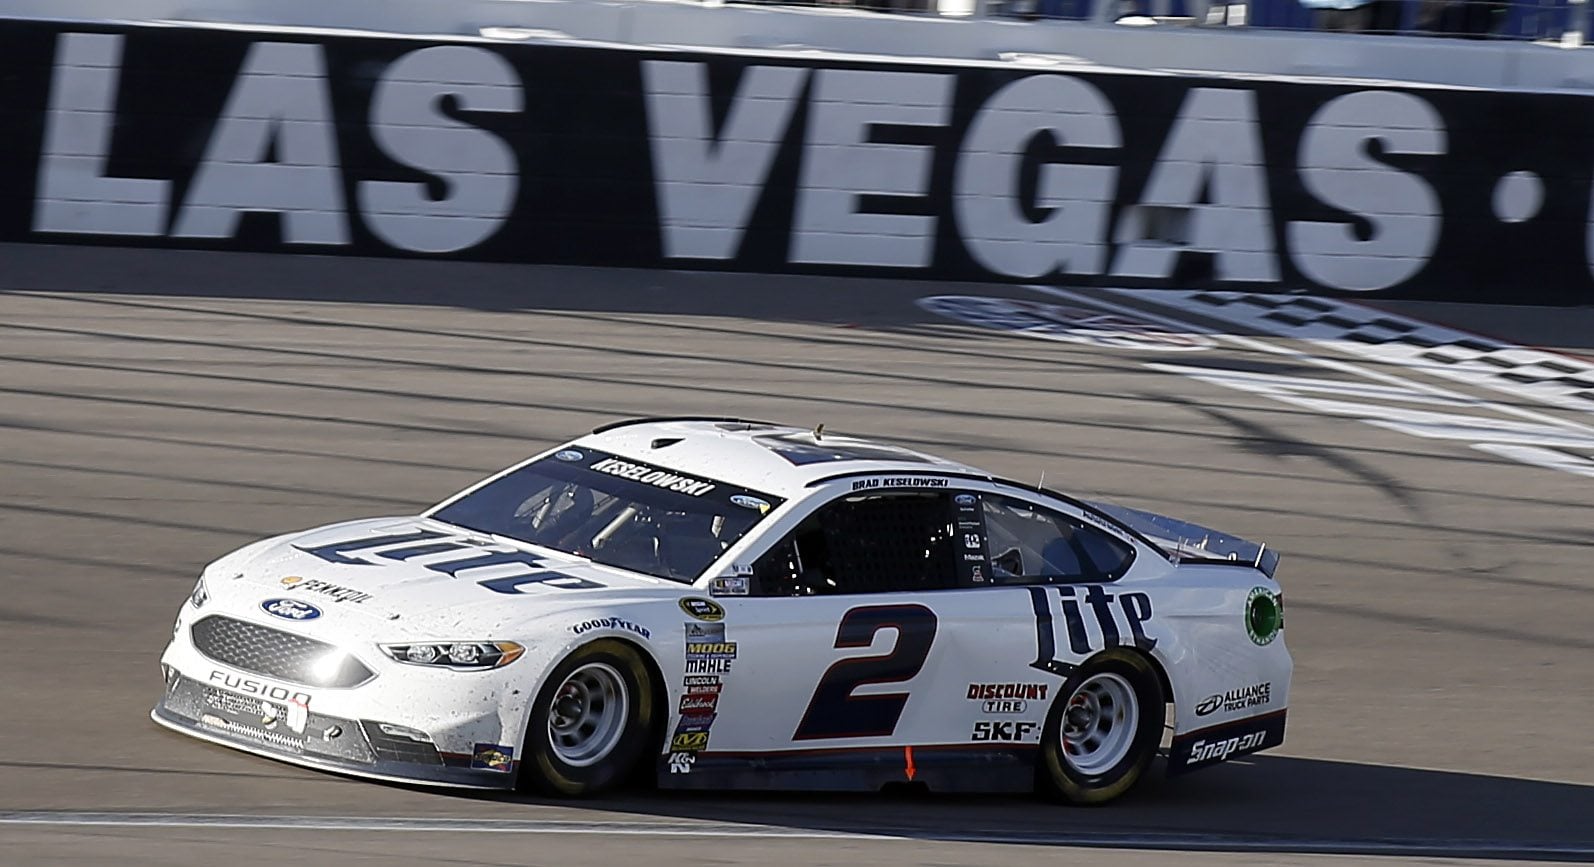 Brad Keselowski drives during a NASCAR Sprint Cup Series auto race Sunday, March 6, 2016, in Las Vegas.